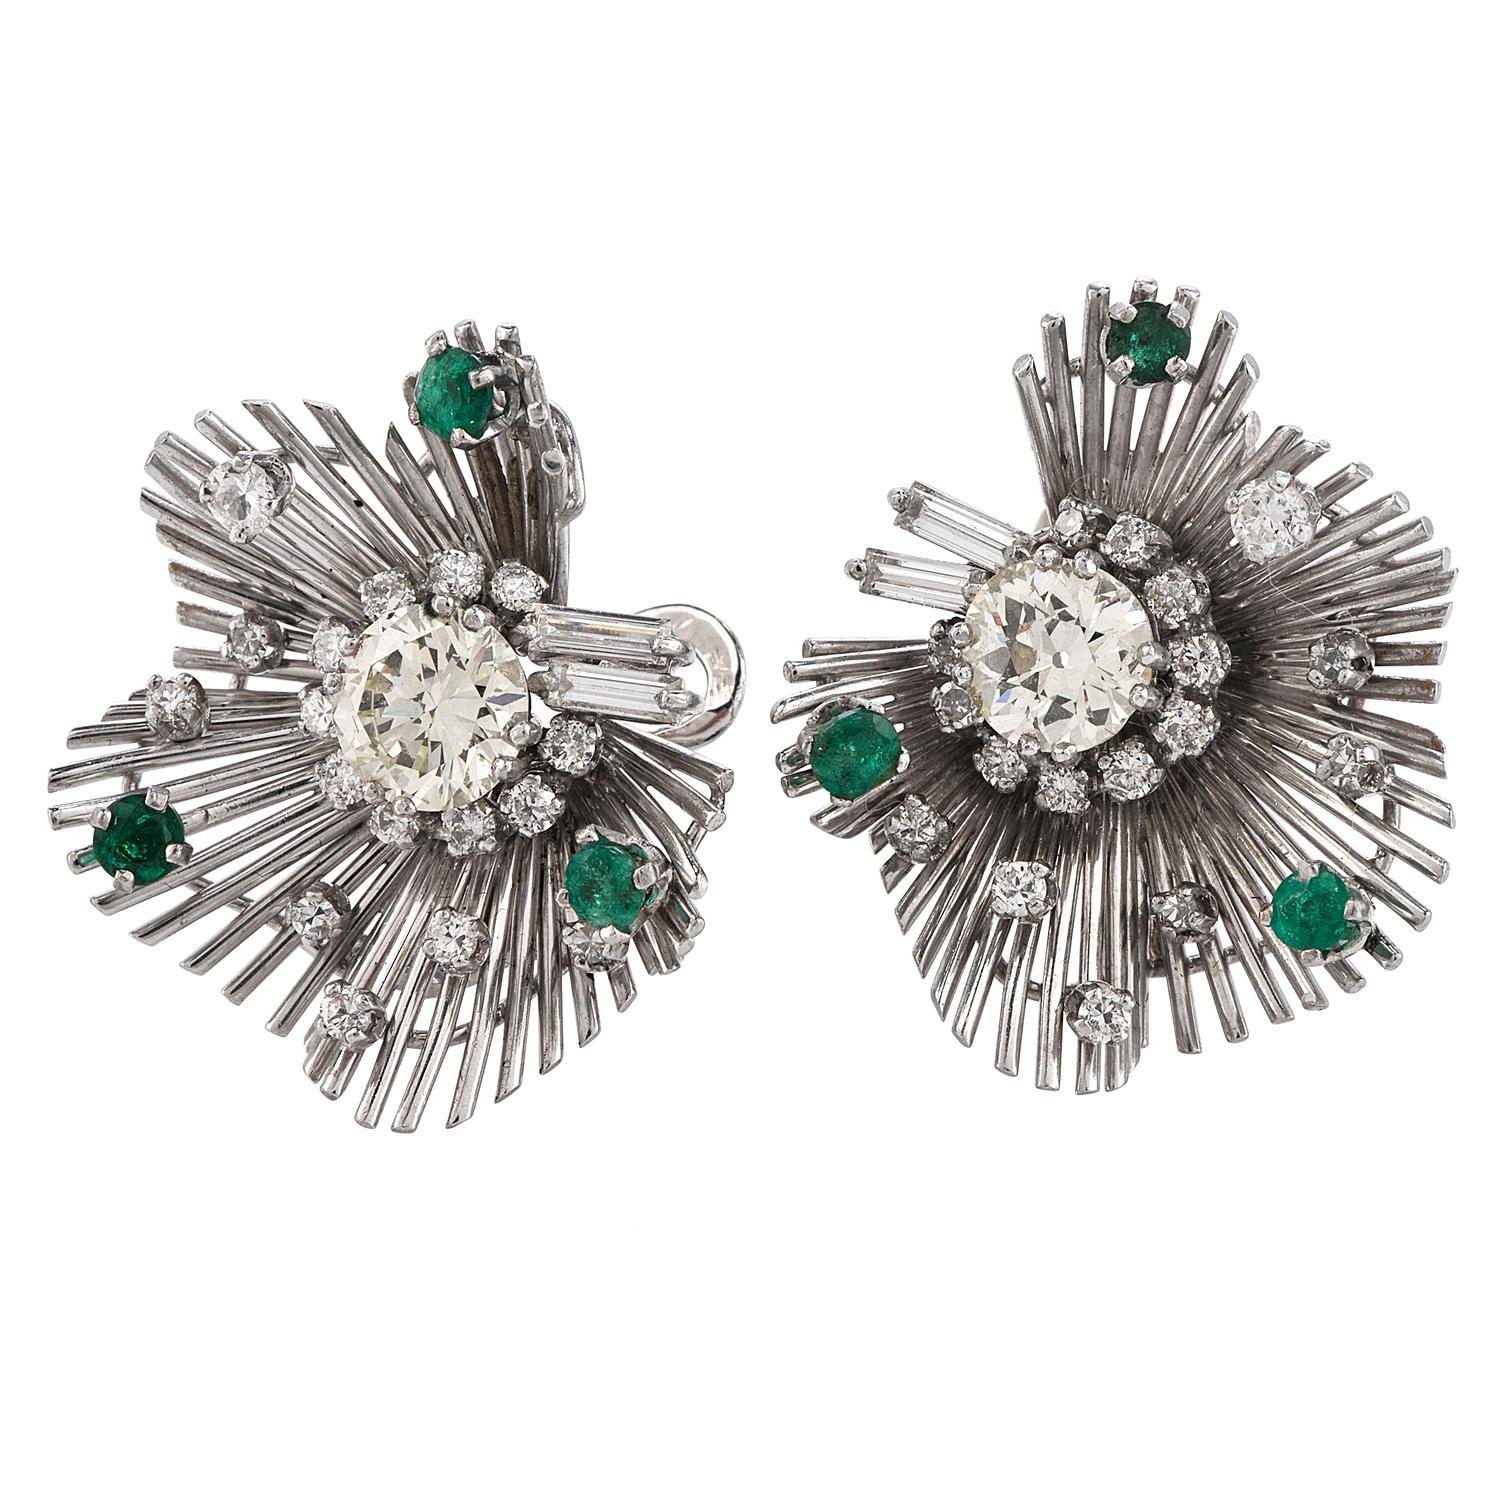 These beautiful clip-on earrings offer bright green Emeralds to contrast with the radiance of the Diamonds and weigh approximately 24.1 Grams.
Expertly Crafted in Solid Platinum, the center stones are (2) Old European cut Genuine Diamonds weighing